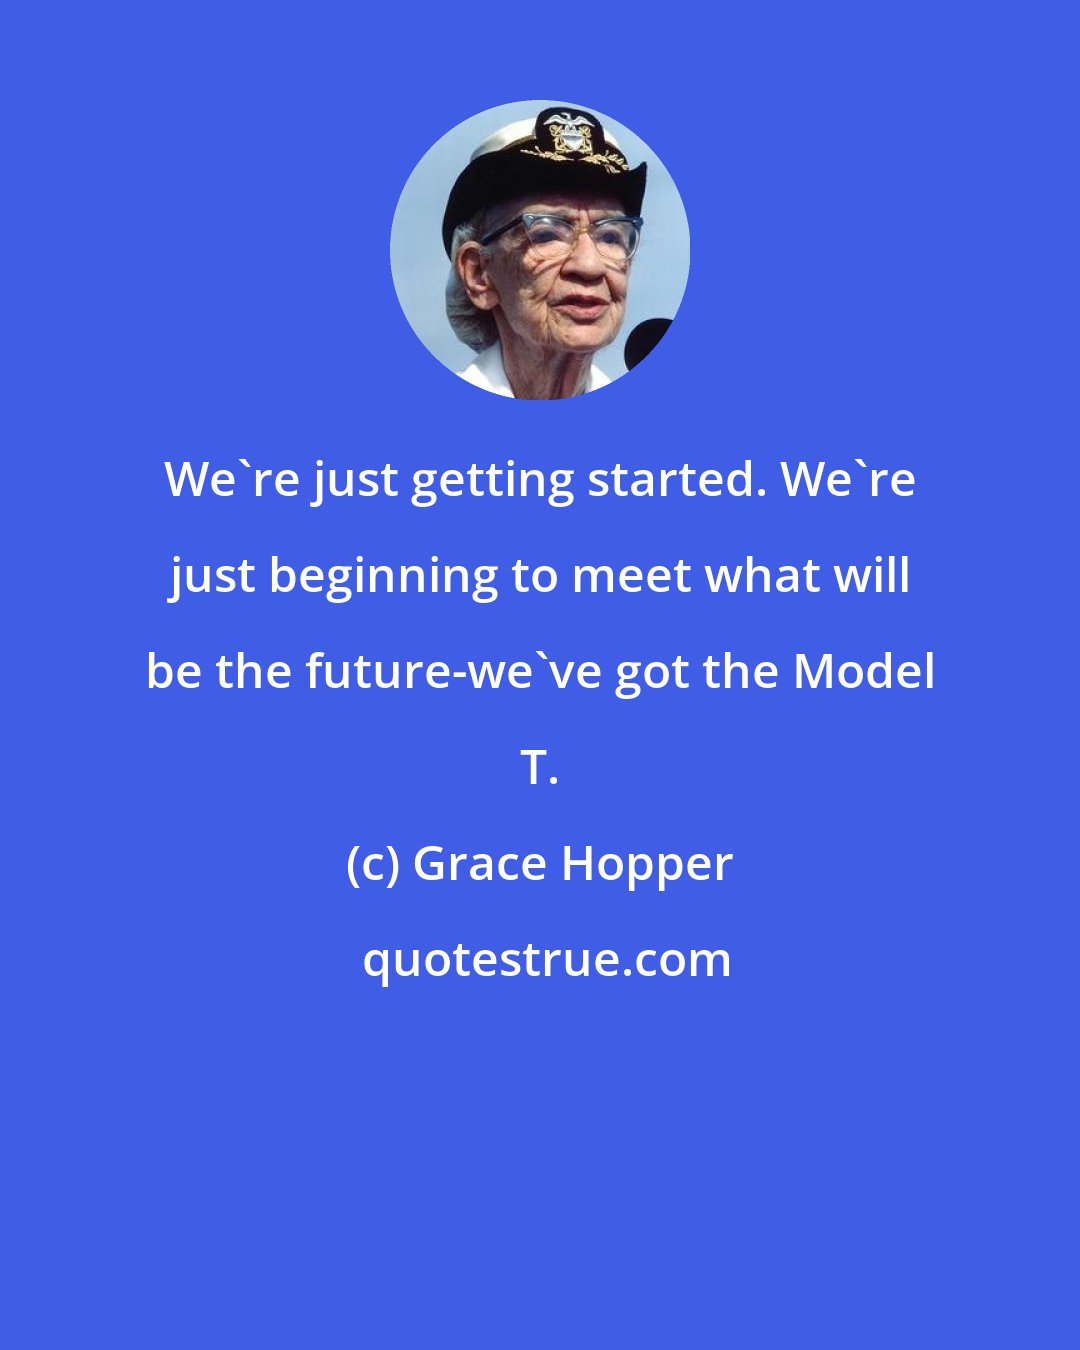 Grace Hopper: We're just getting started. We're just beginning to meet what will be the future-we've got the Model T.